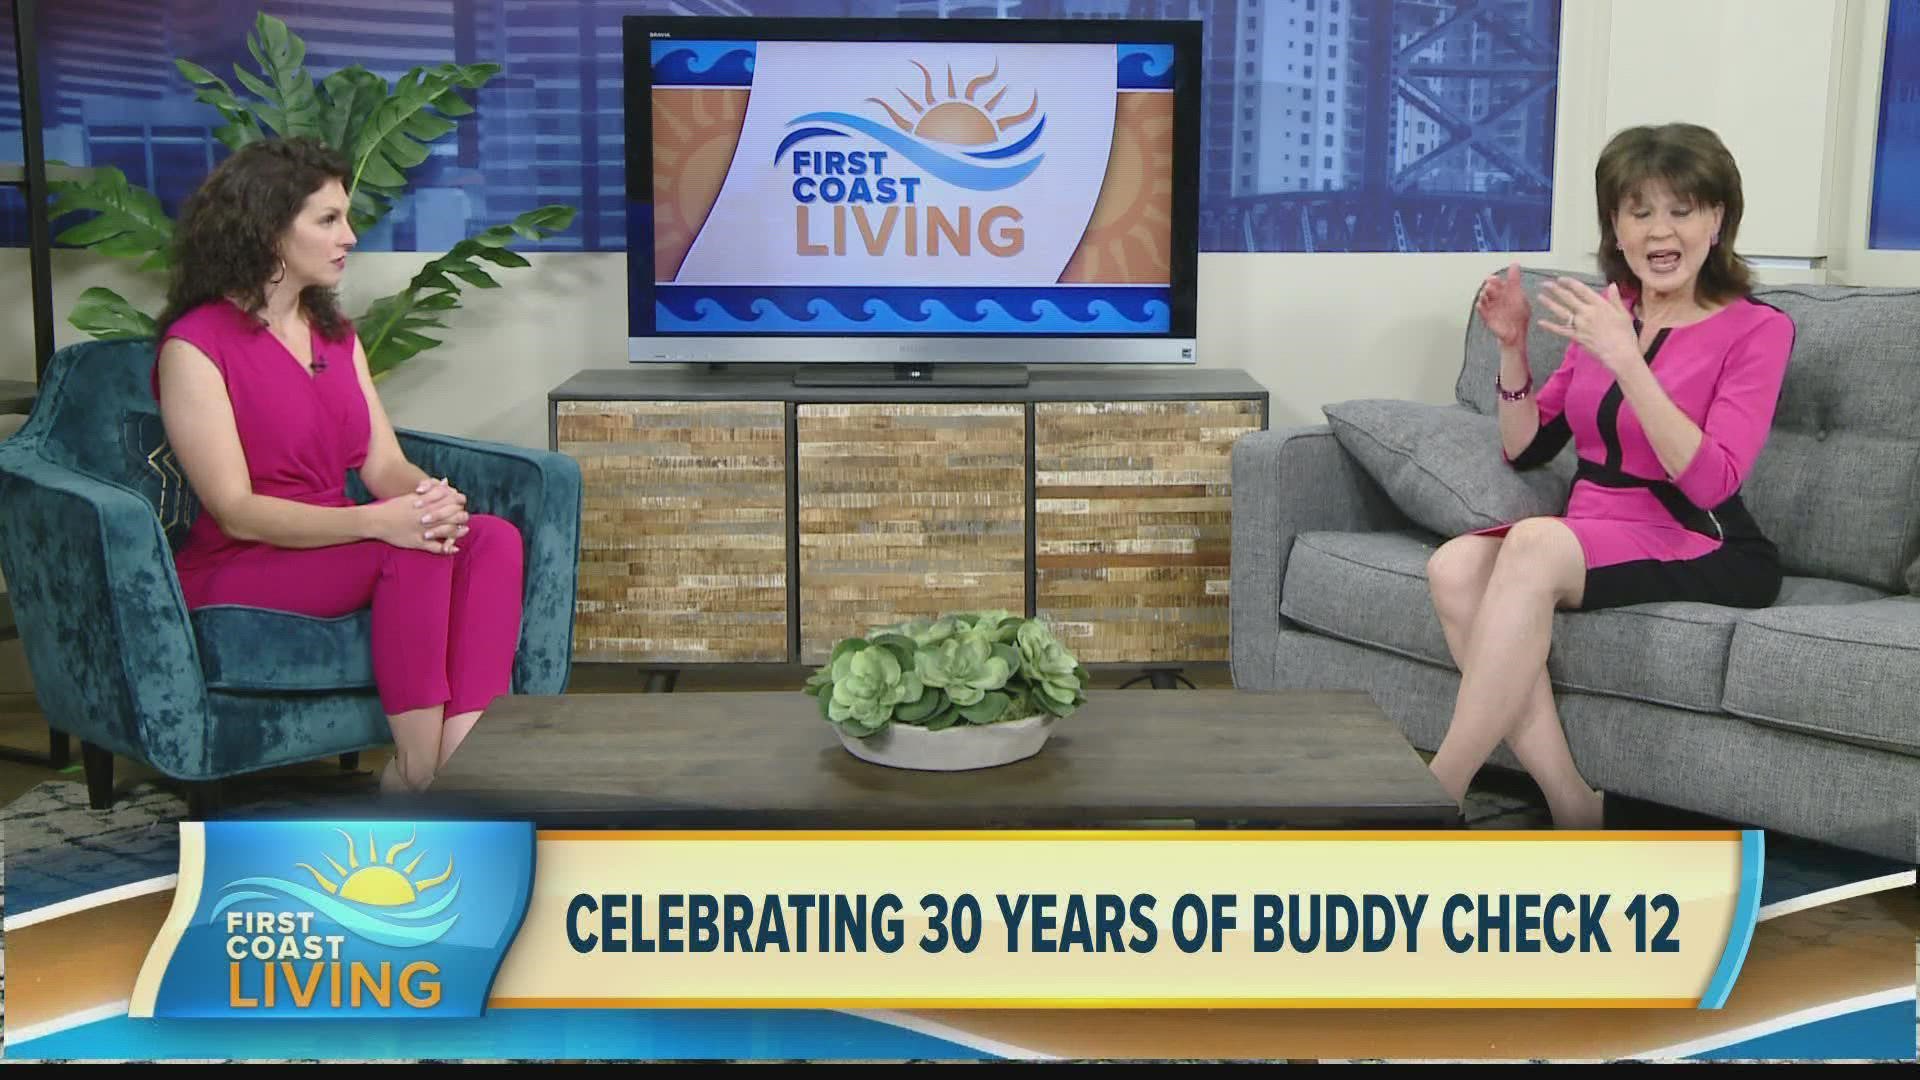 Buddy Check encourages women to get a buddy and remind each other to get mammograms and do monthly self exams.